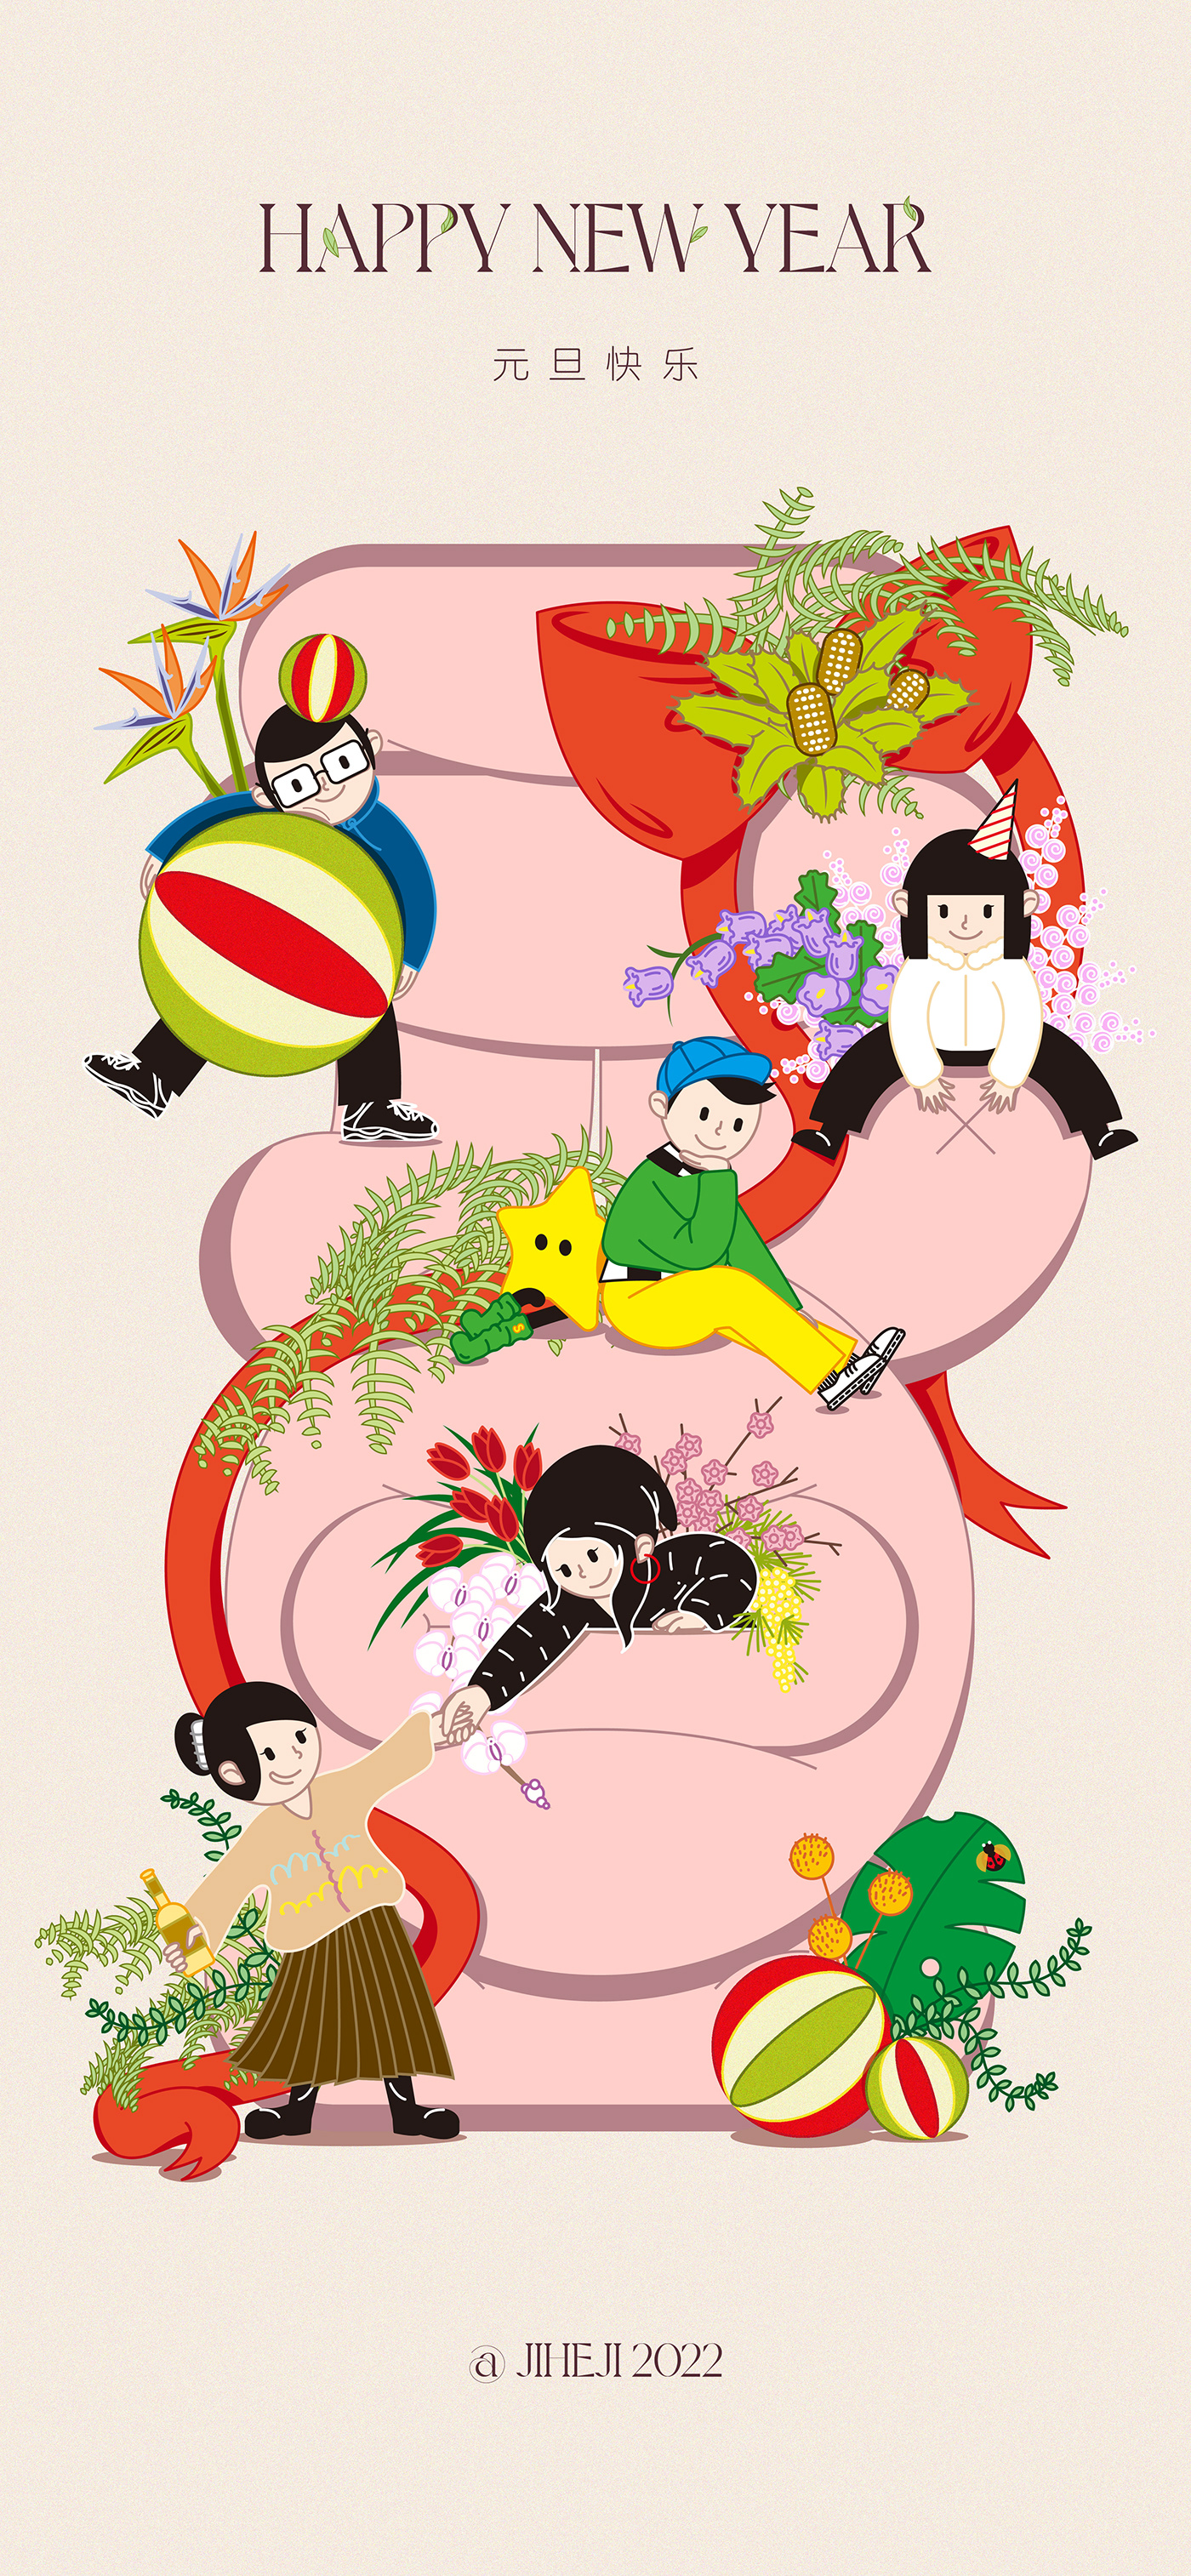 Florist Poster ILLUSTRATION  New Year poster